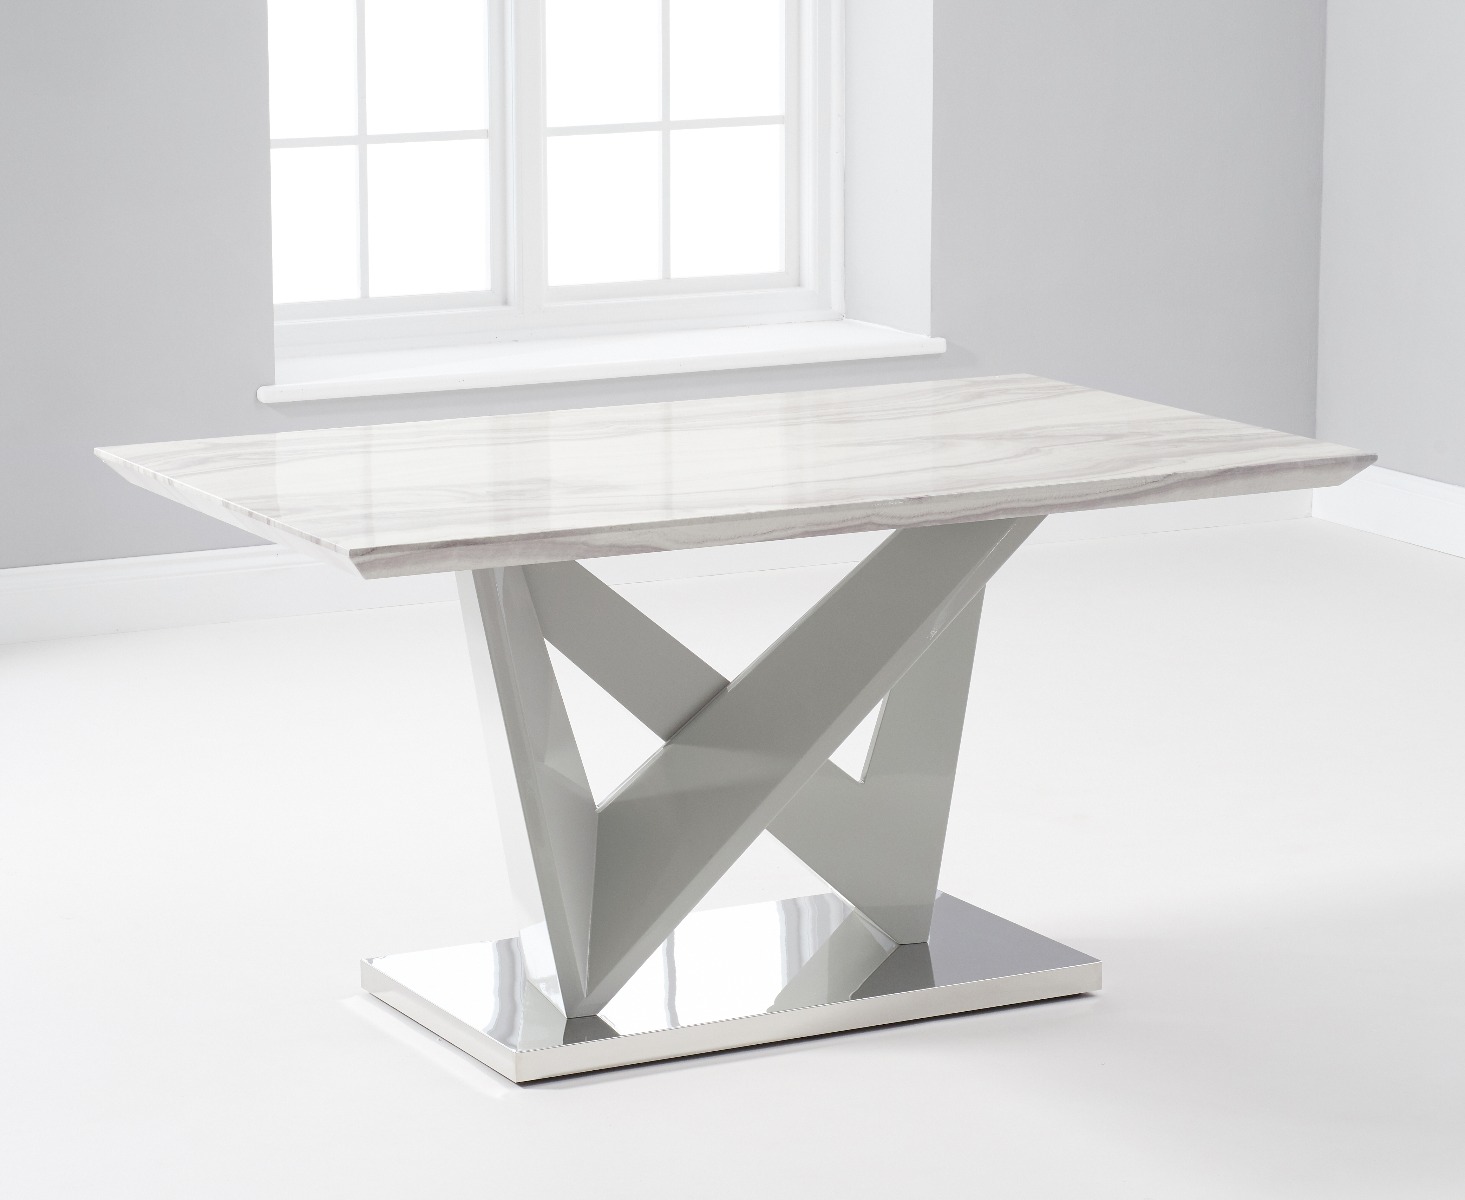 Photo 1 of Reims 150cm marble effect carrera light grey dining table